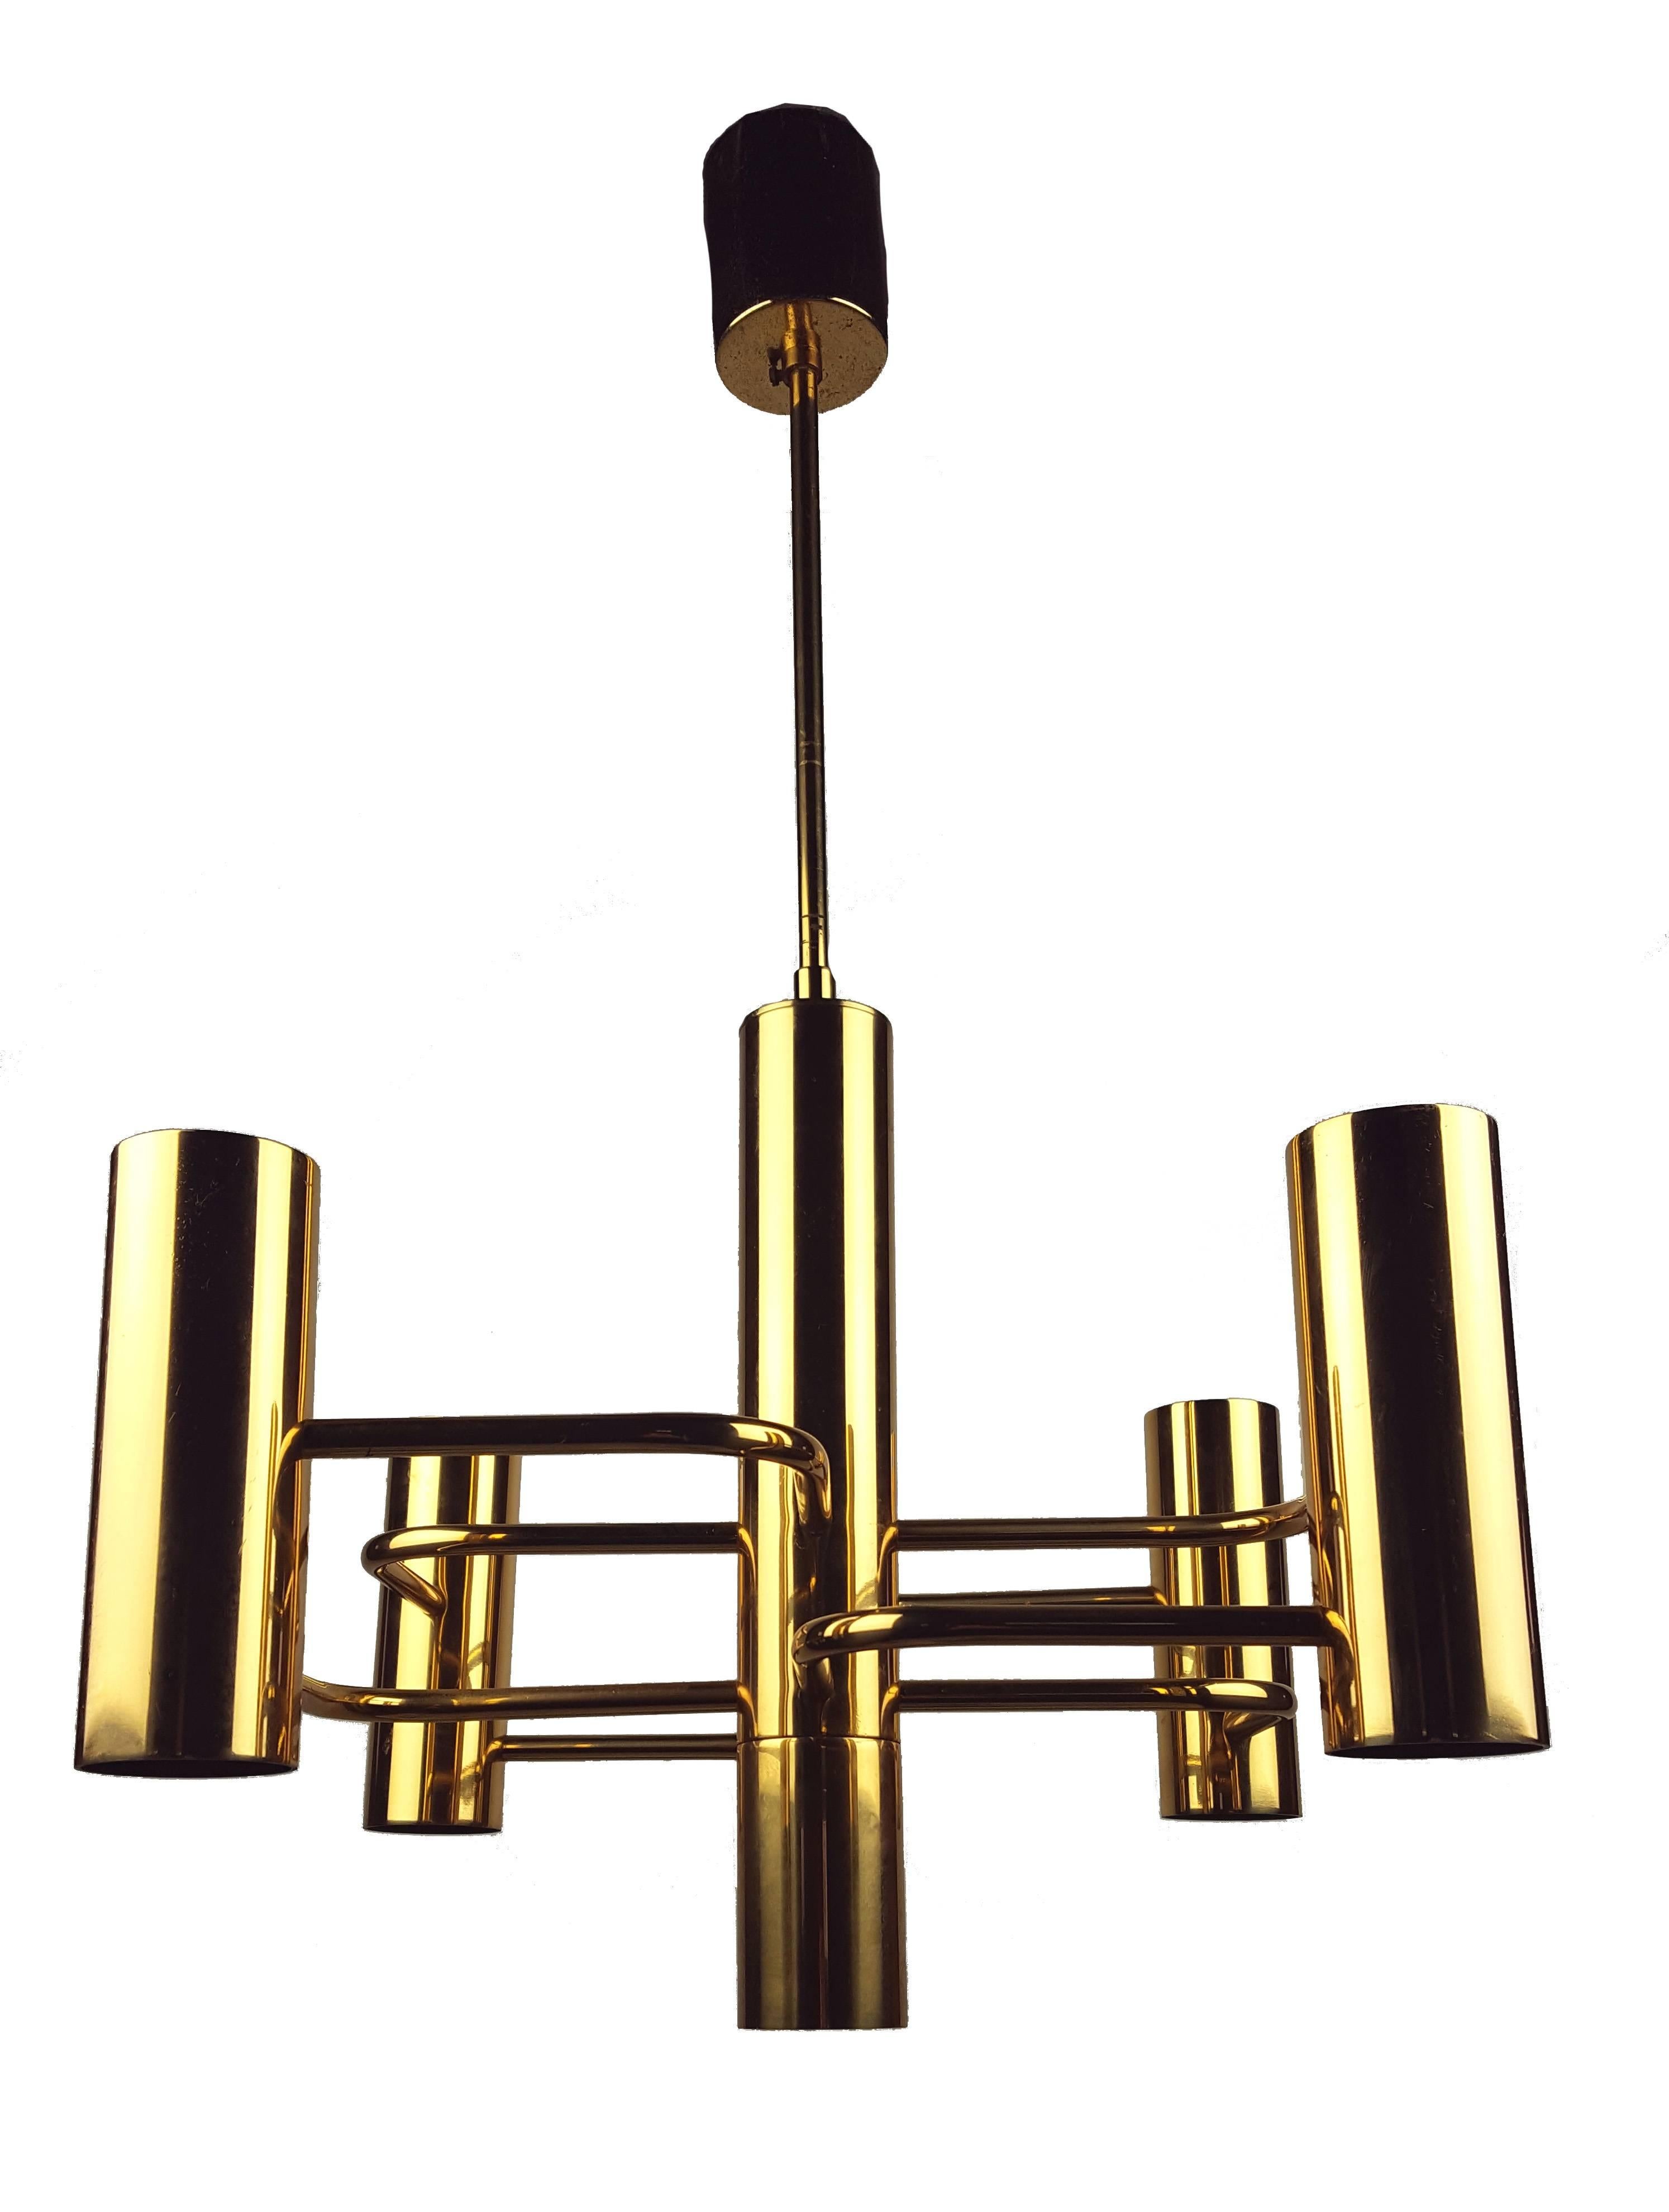 Sculptural and five-armed chandelier on a brass steel frame. Designed by Gaetano Sciolari for Belgian producer Boulanger from 1970. 

Measures: Height 40 cm / 15.7 inch
Diameter 50 cm / 19.7 inch

Is in a good, undamaged condition. 
Please